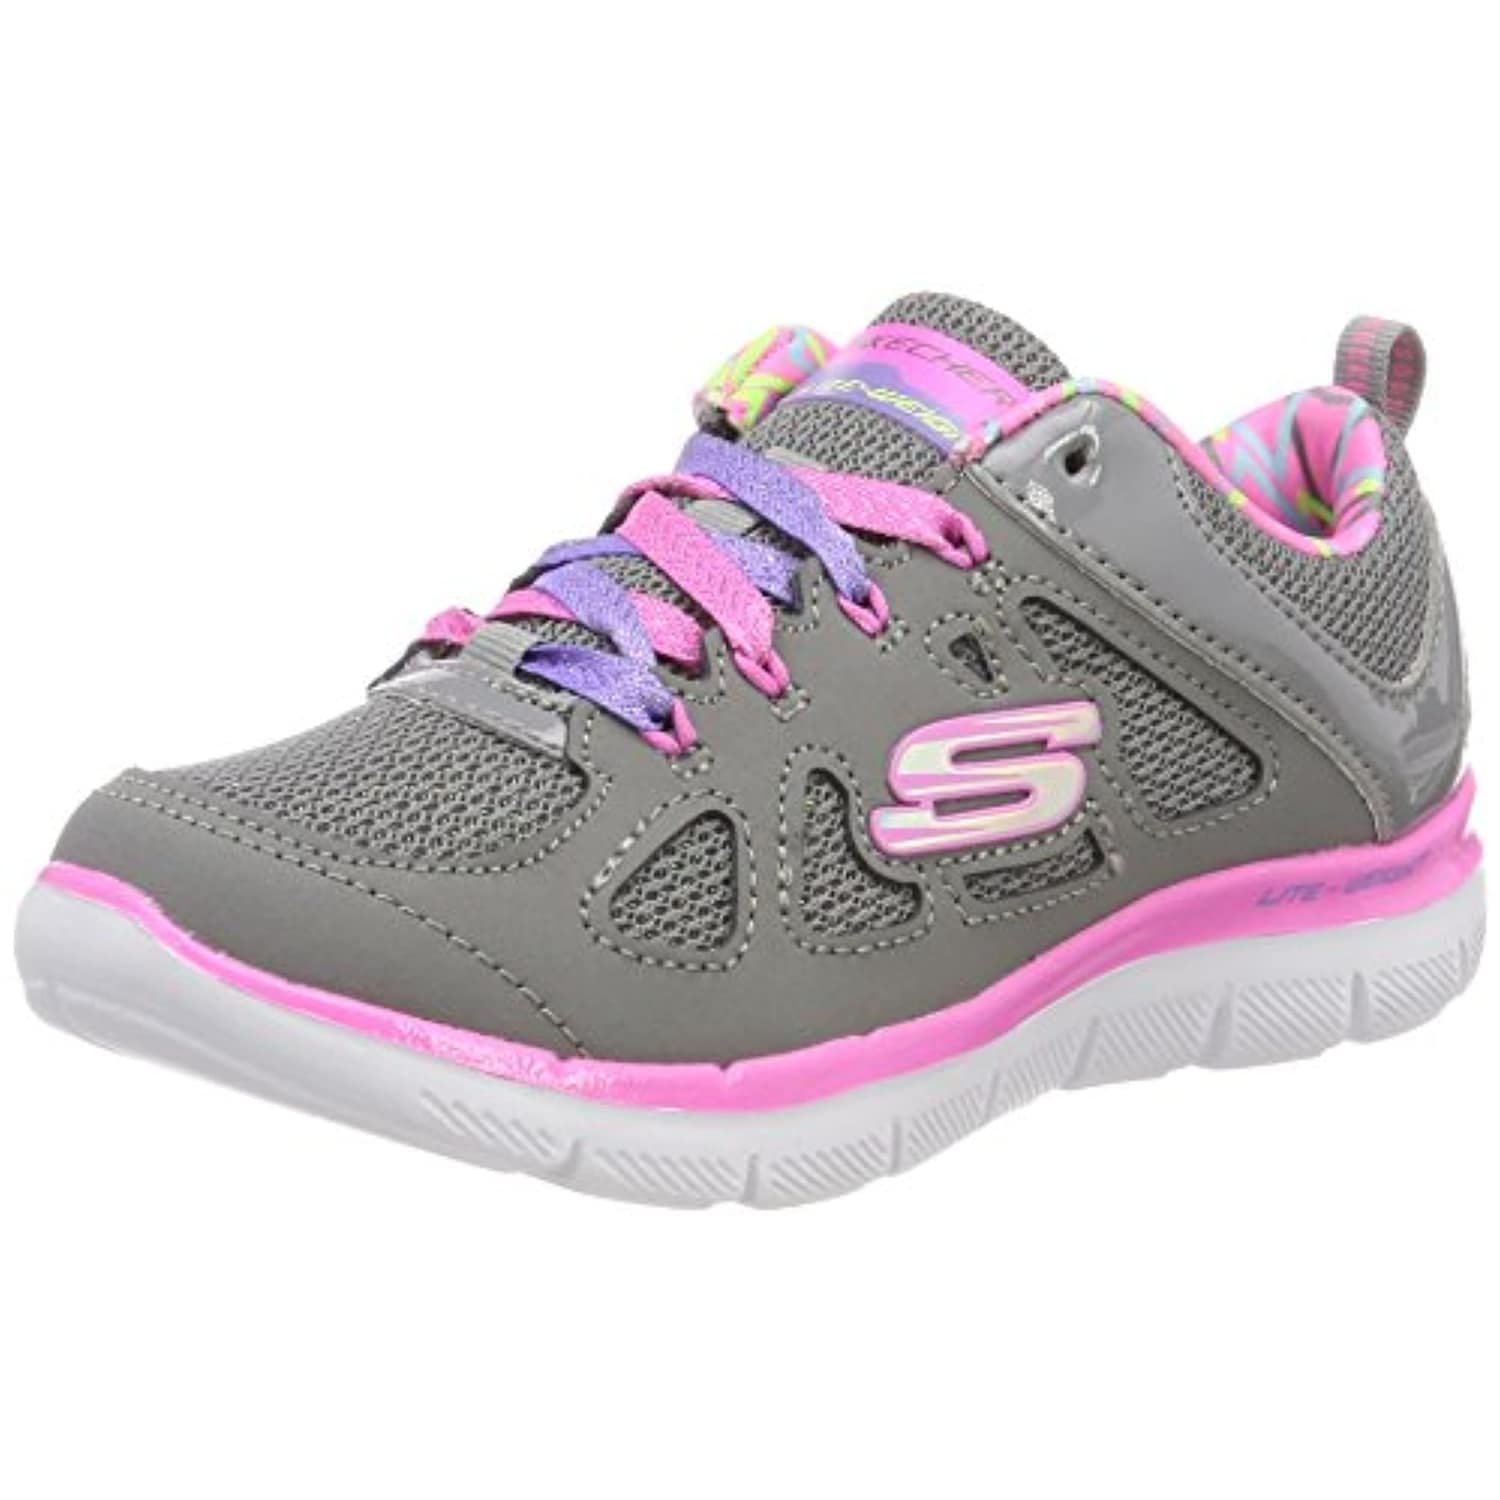 gray and pink tennis shoes